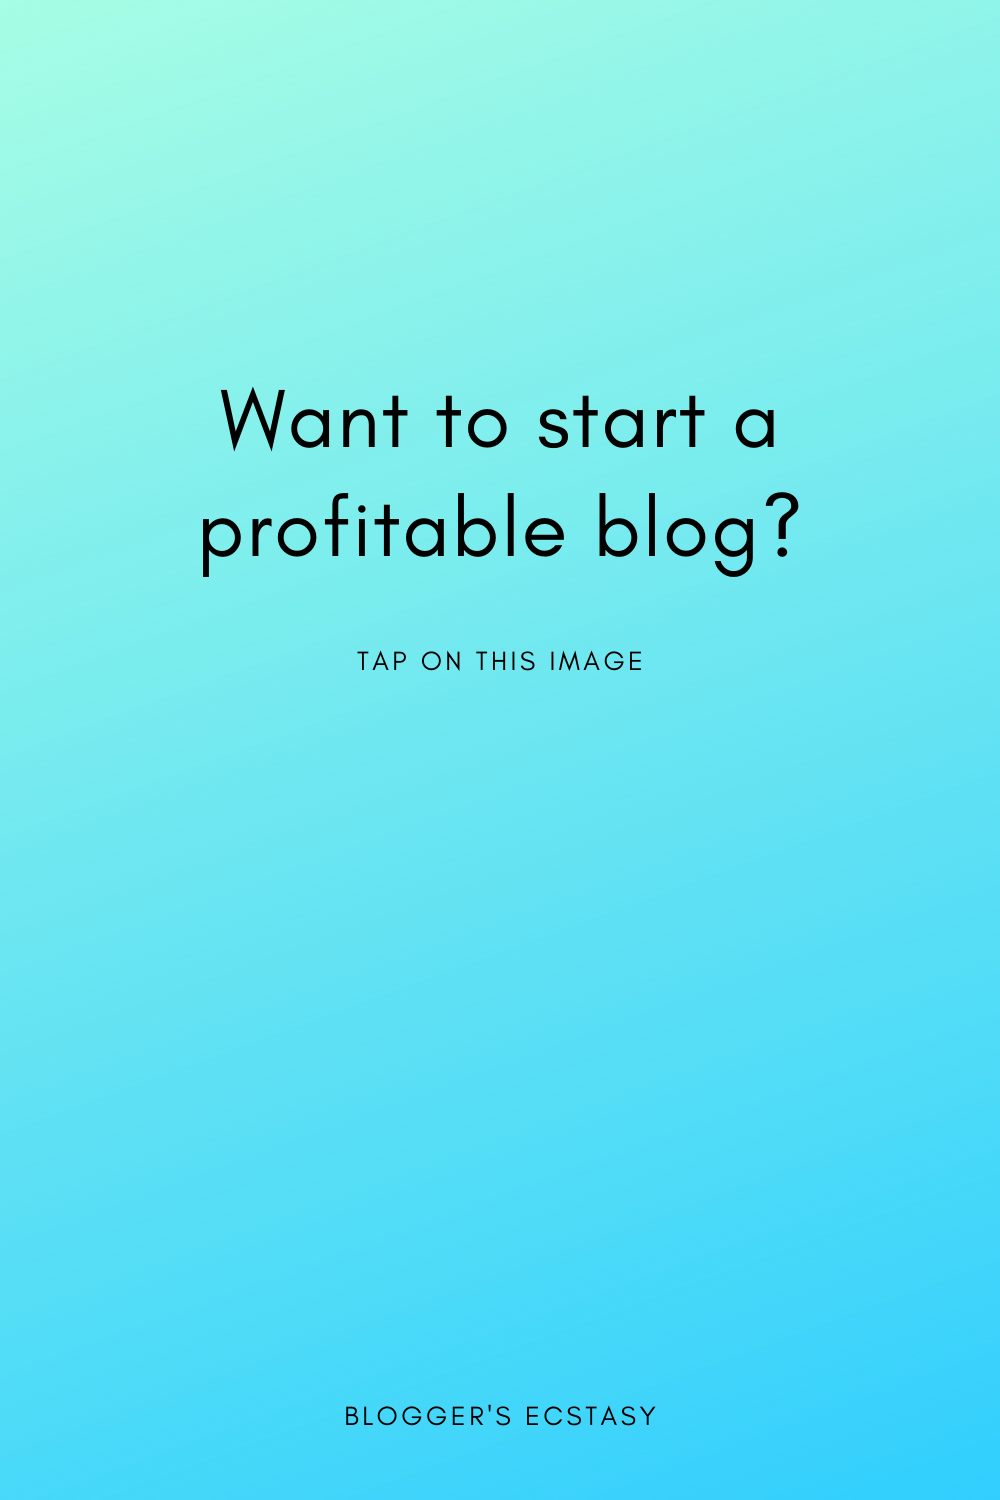 How to start a profitable blog using quora and pinterest, blogging for beginners quora,